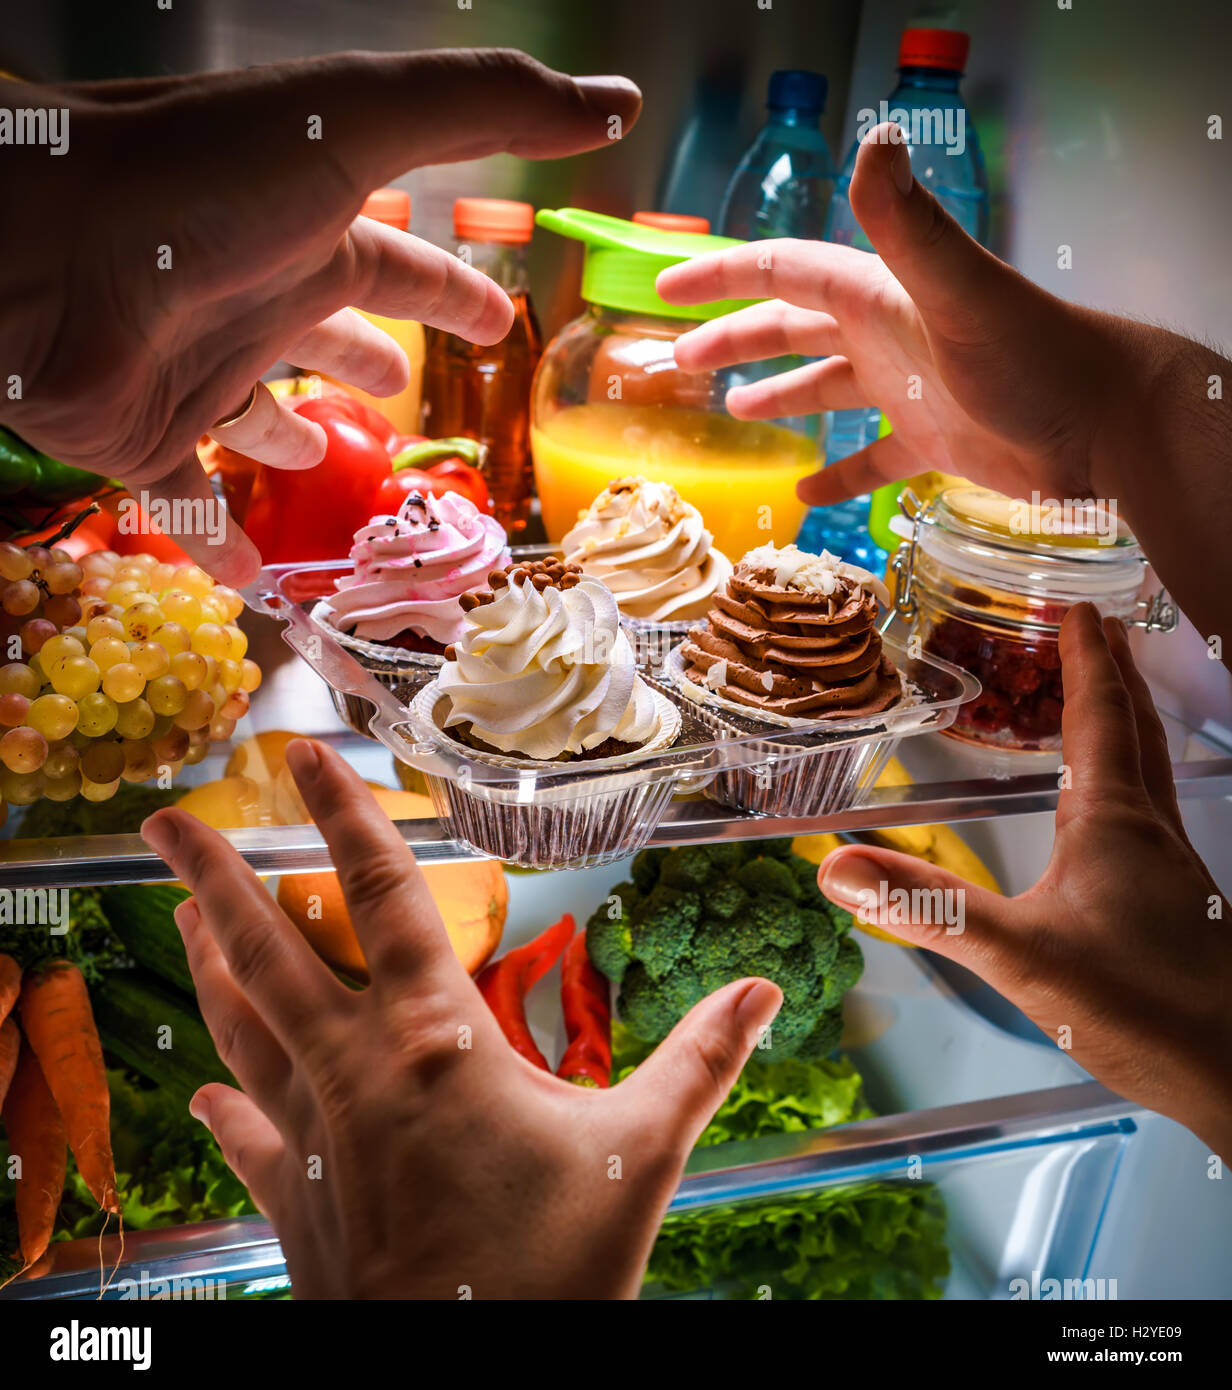 Human hands reaching for sweet cake at night in the open refrigerator Stock Photo